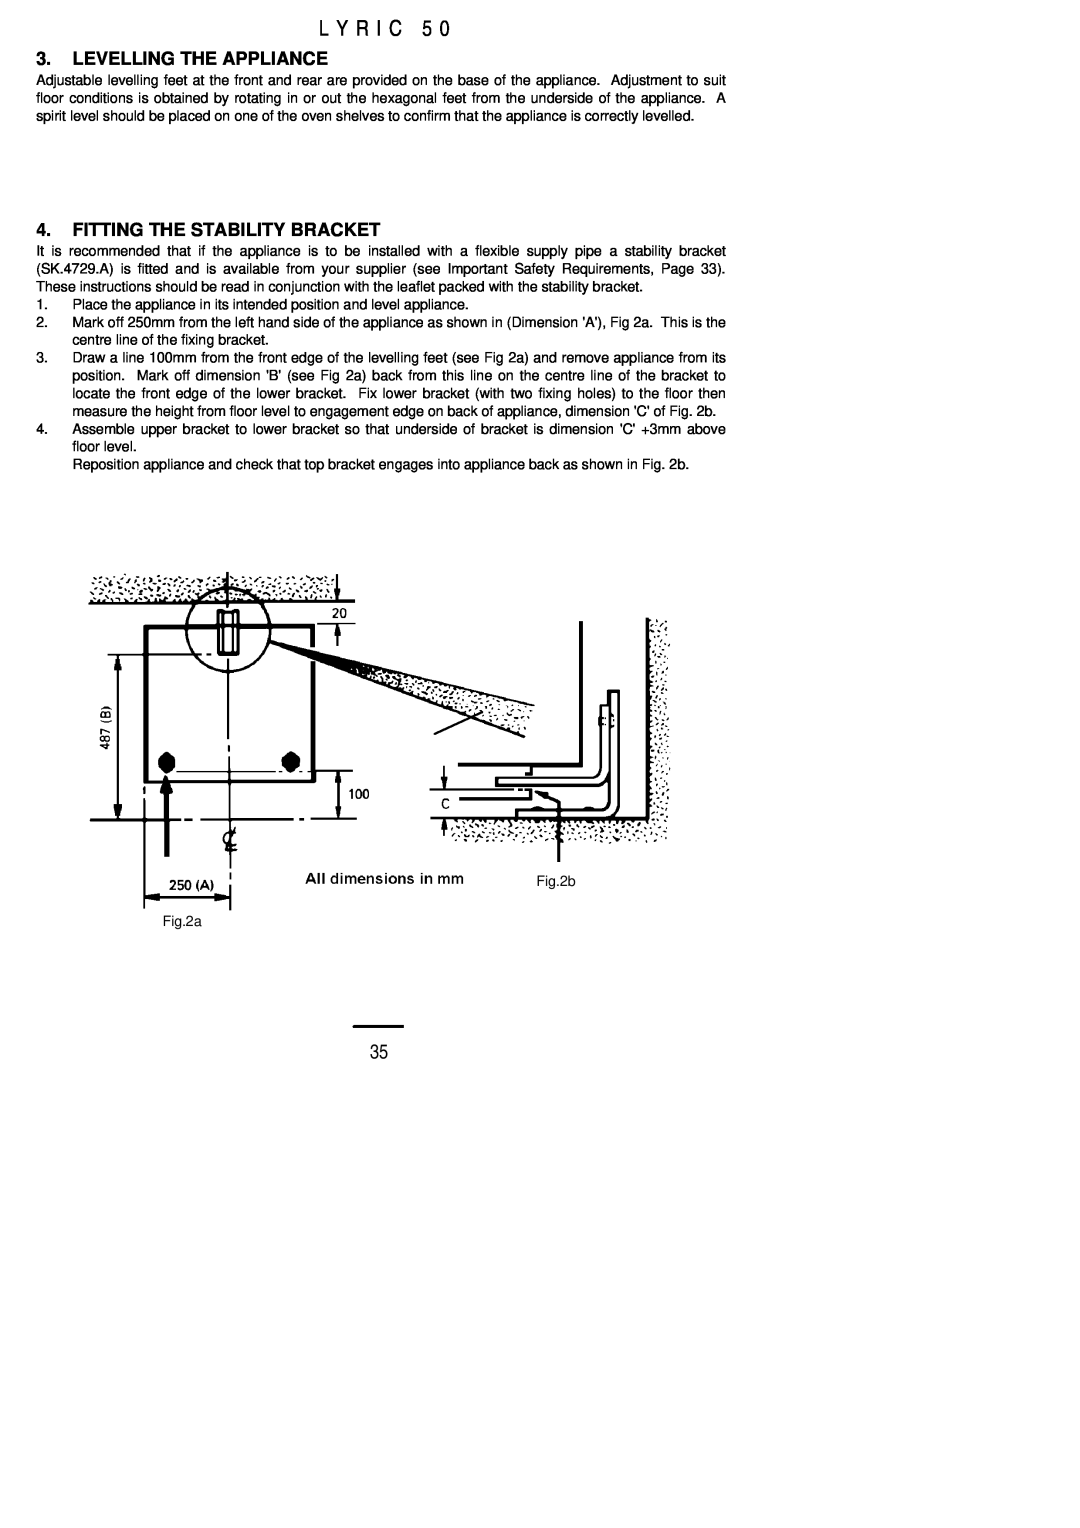 Electrolux LYRIC50 installation instructions L Y R I C, Levelling The Appliance, Fitting The Stability Bracket 